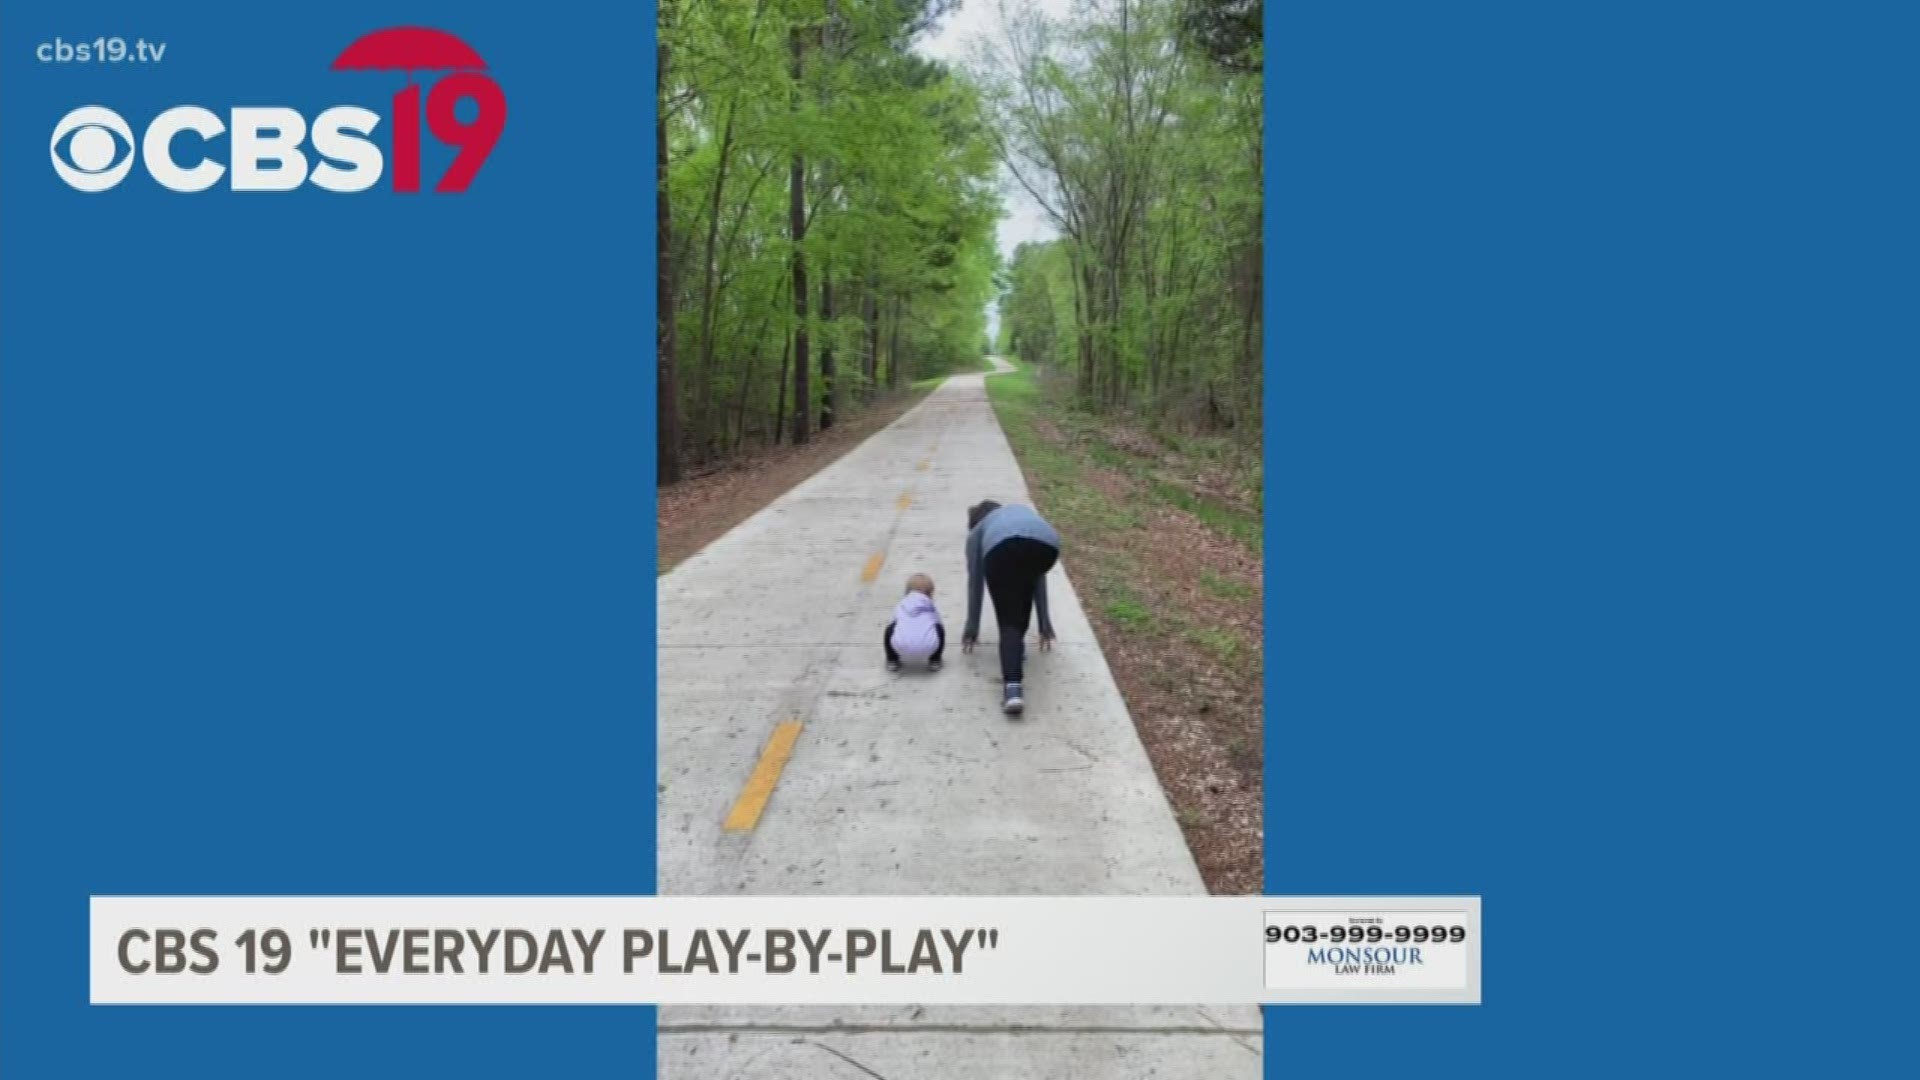 To have Johnny Congdon or Tina Nguyen show your #EverydayPlayByPlay: 1) Record a video; 2) Text "PLAY" to (903) 600-2600; 3) We'll send you a link to upload it!